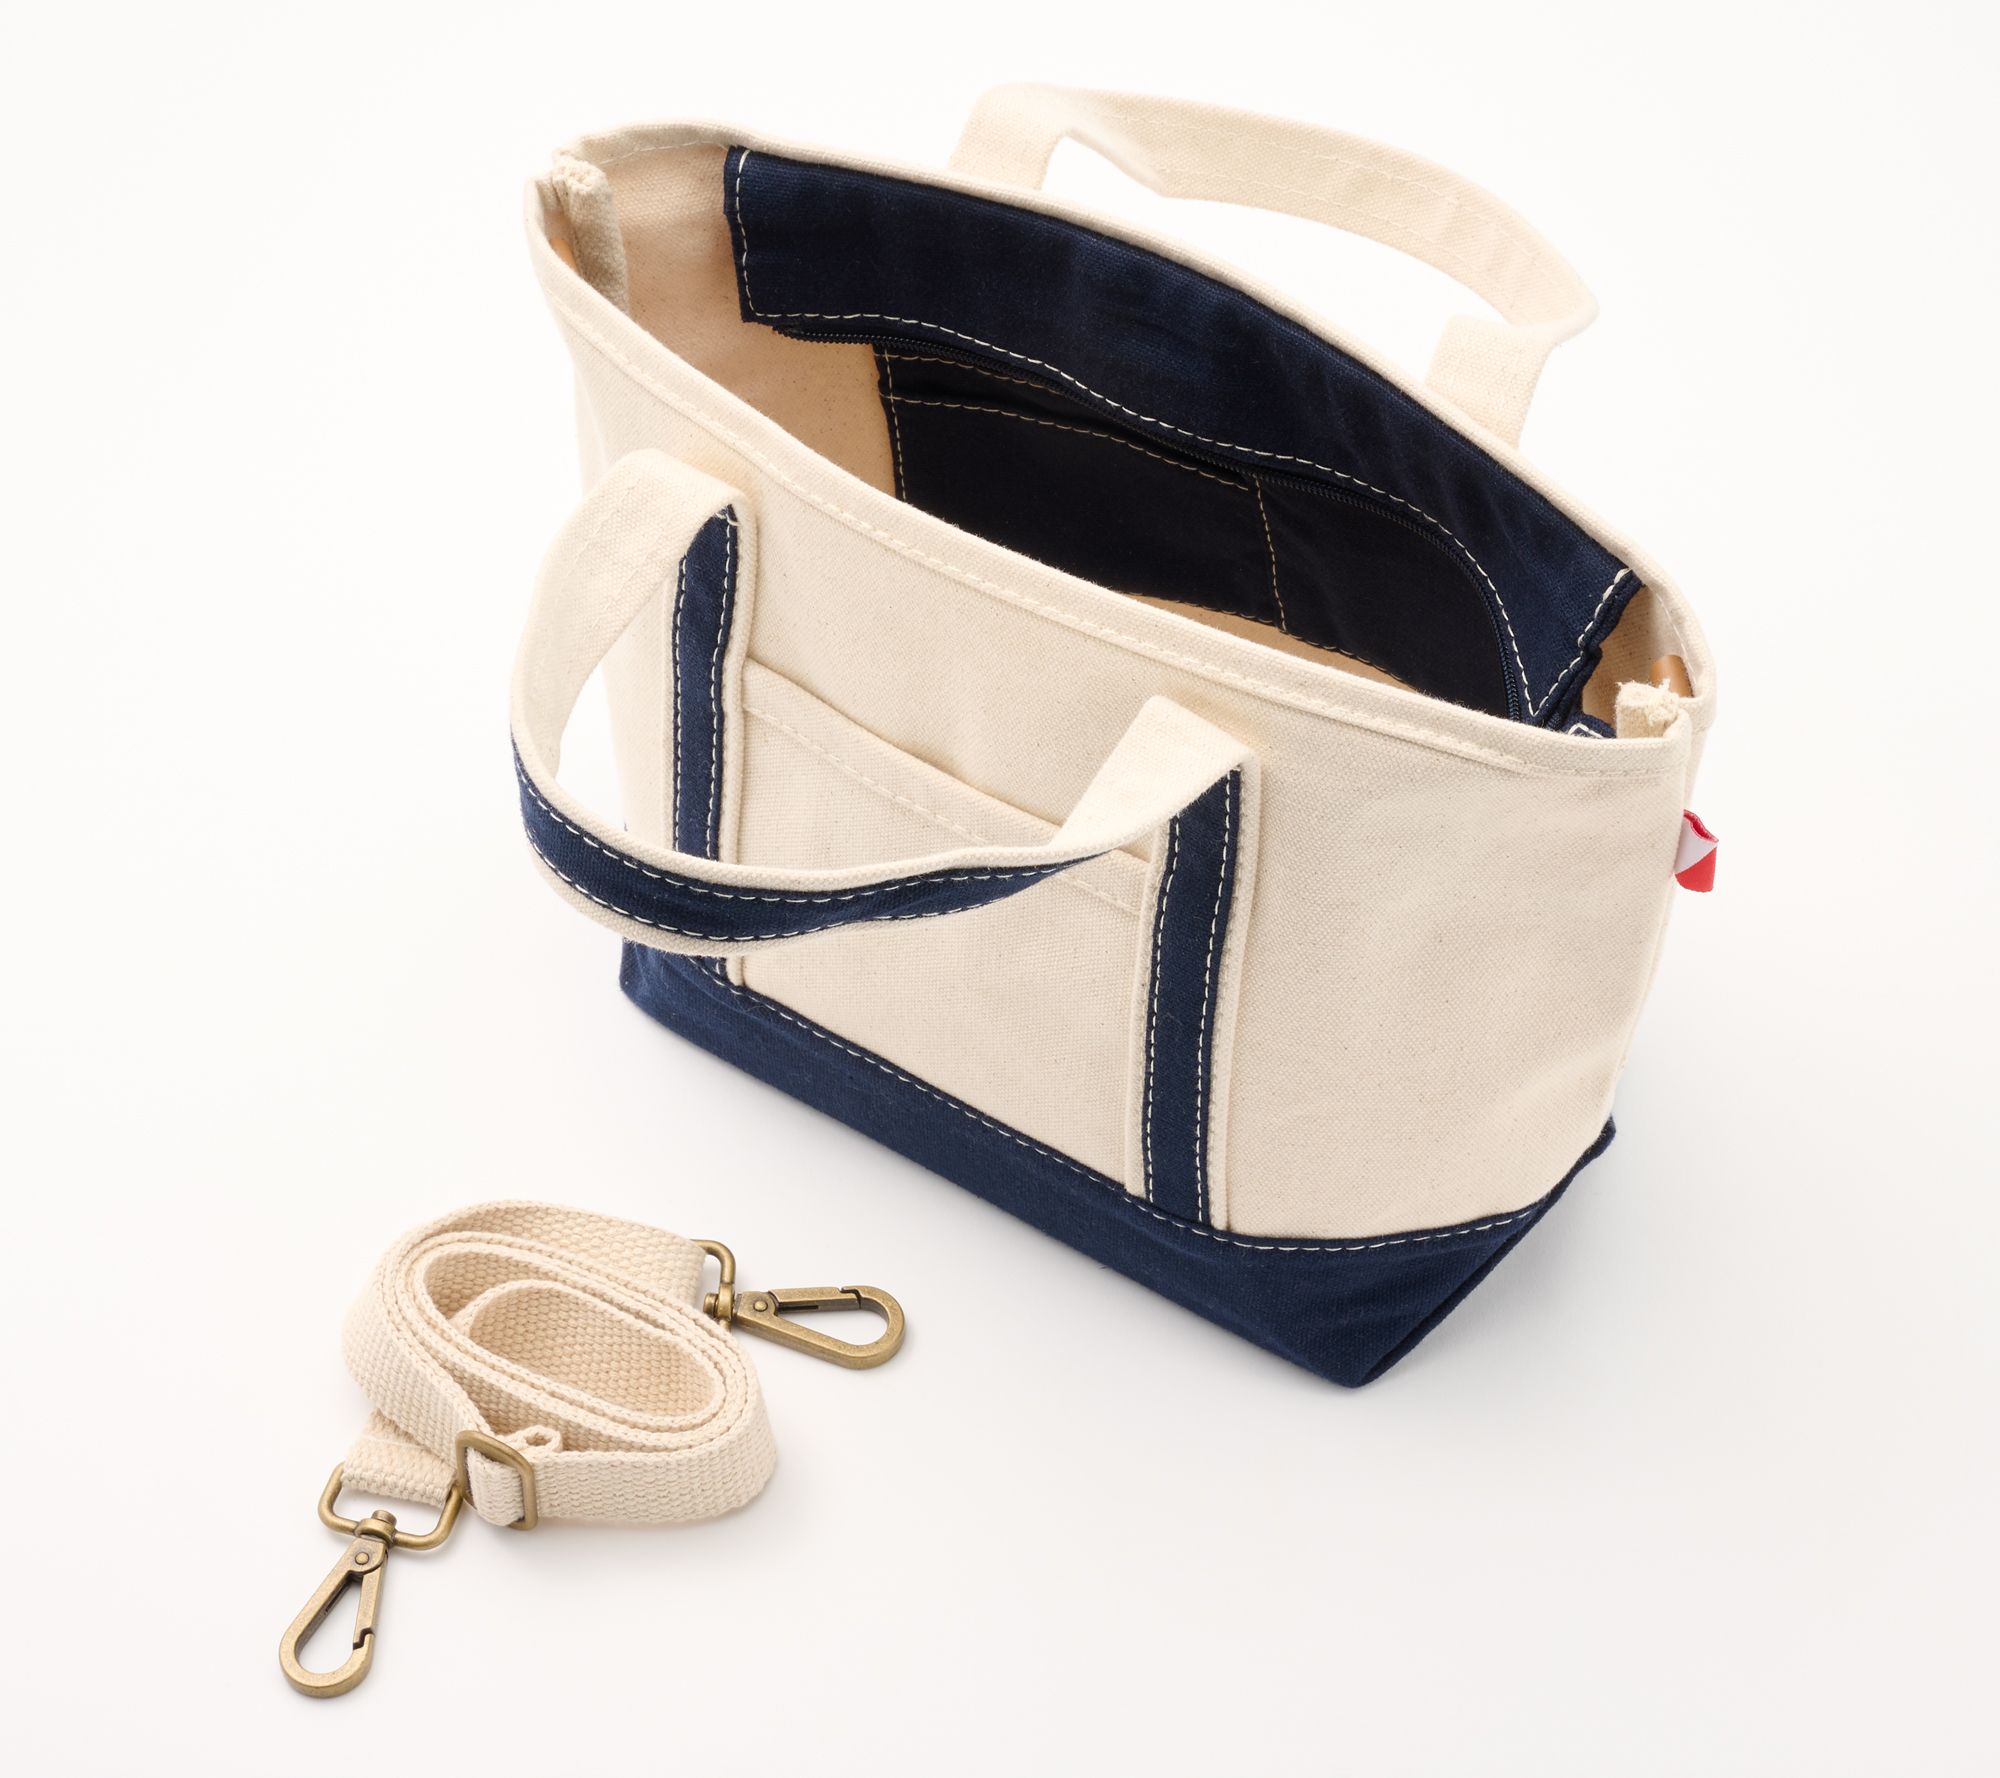 This canvas strap is actually pretty cute! Er well, the entire bag